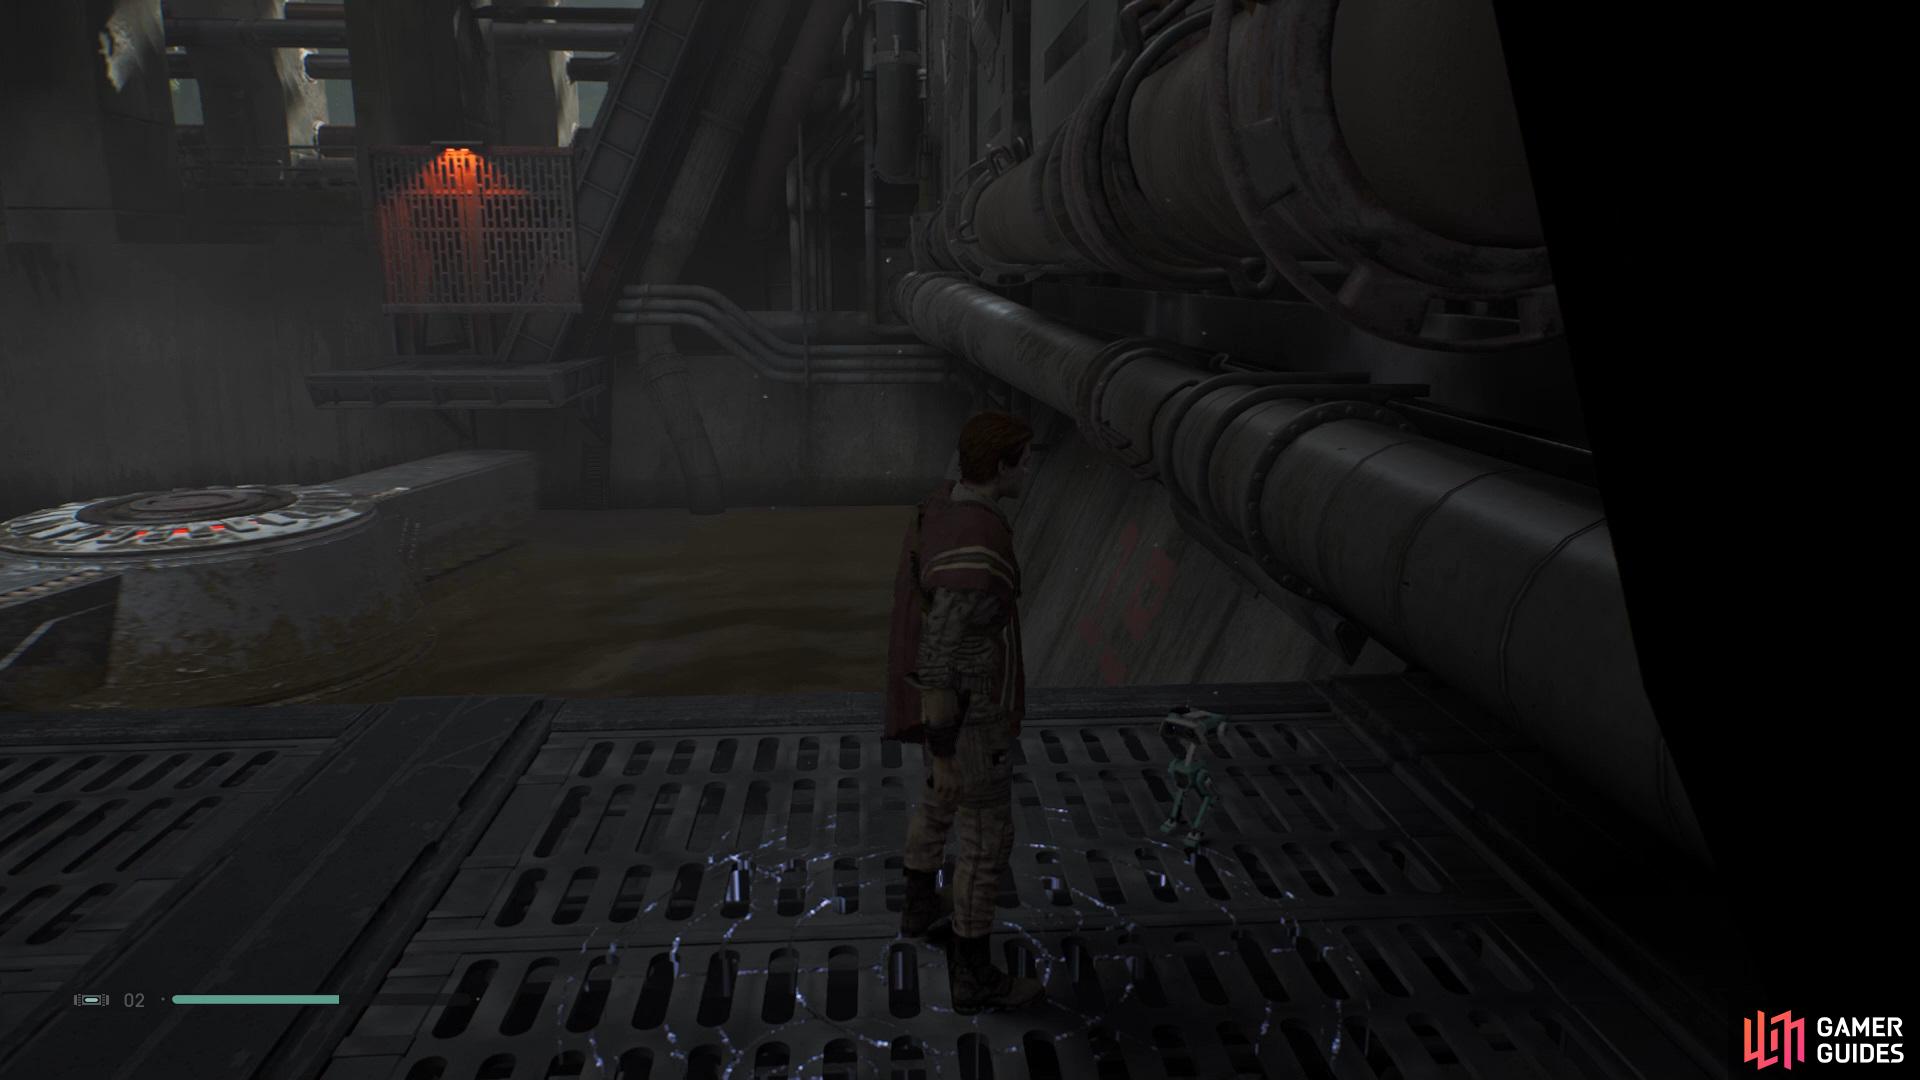 Once you've entered the Imperial Refinery and dealt with the Stormtroopers you'll be able to drop down to the right to find a Meditation Point.